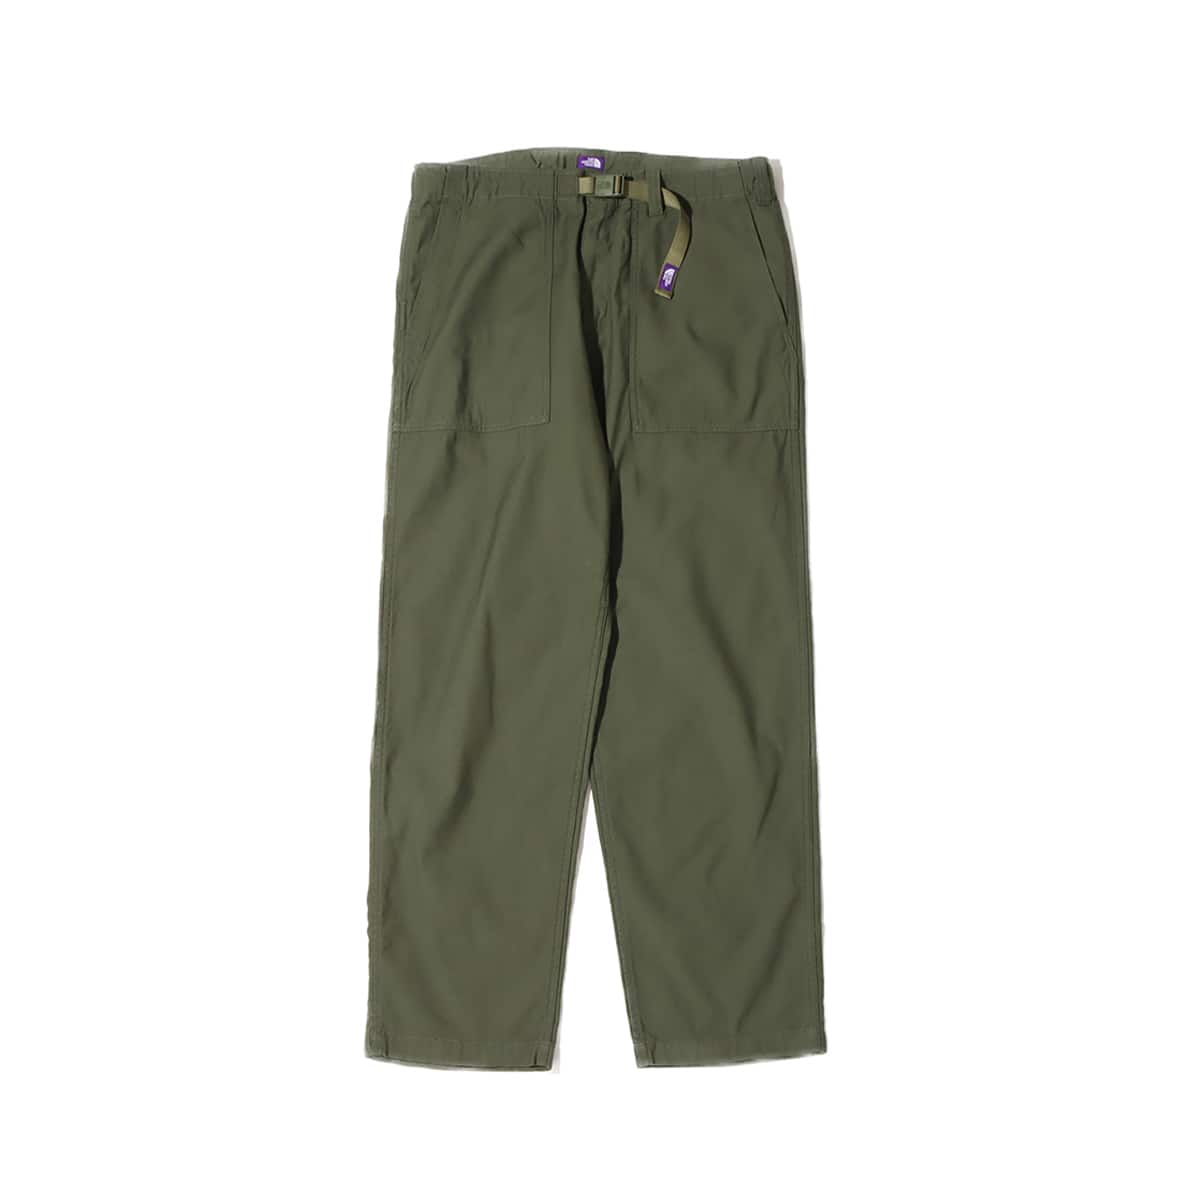 THE NORTH FACE PURPLE LABEL Field Baker Pants Olive Drab